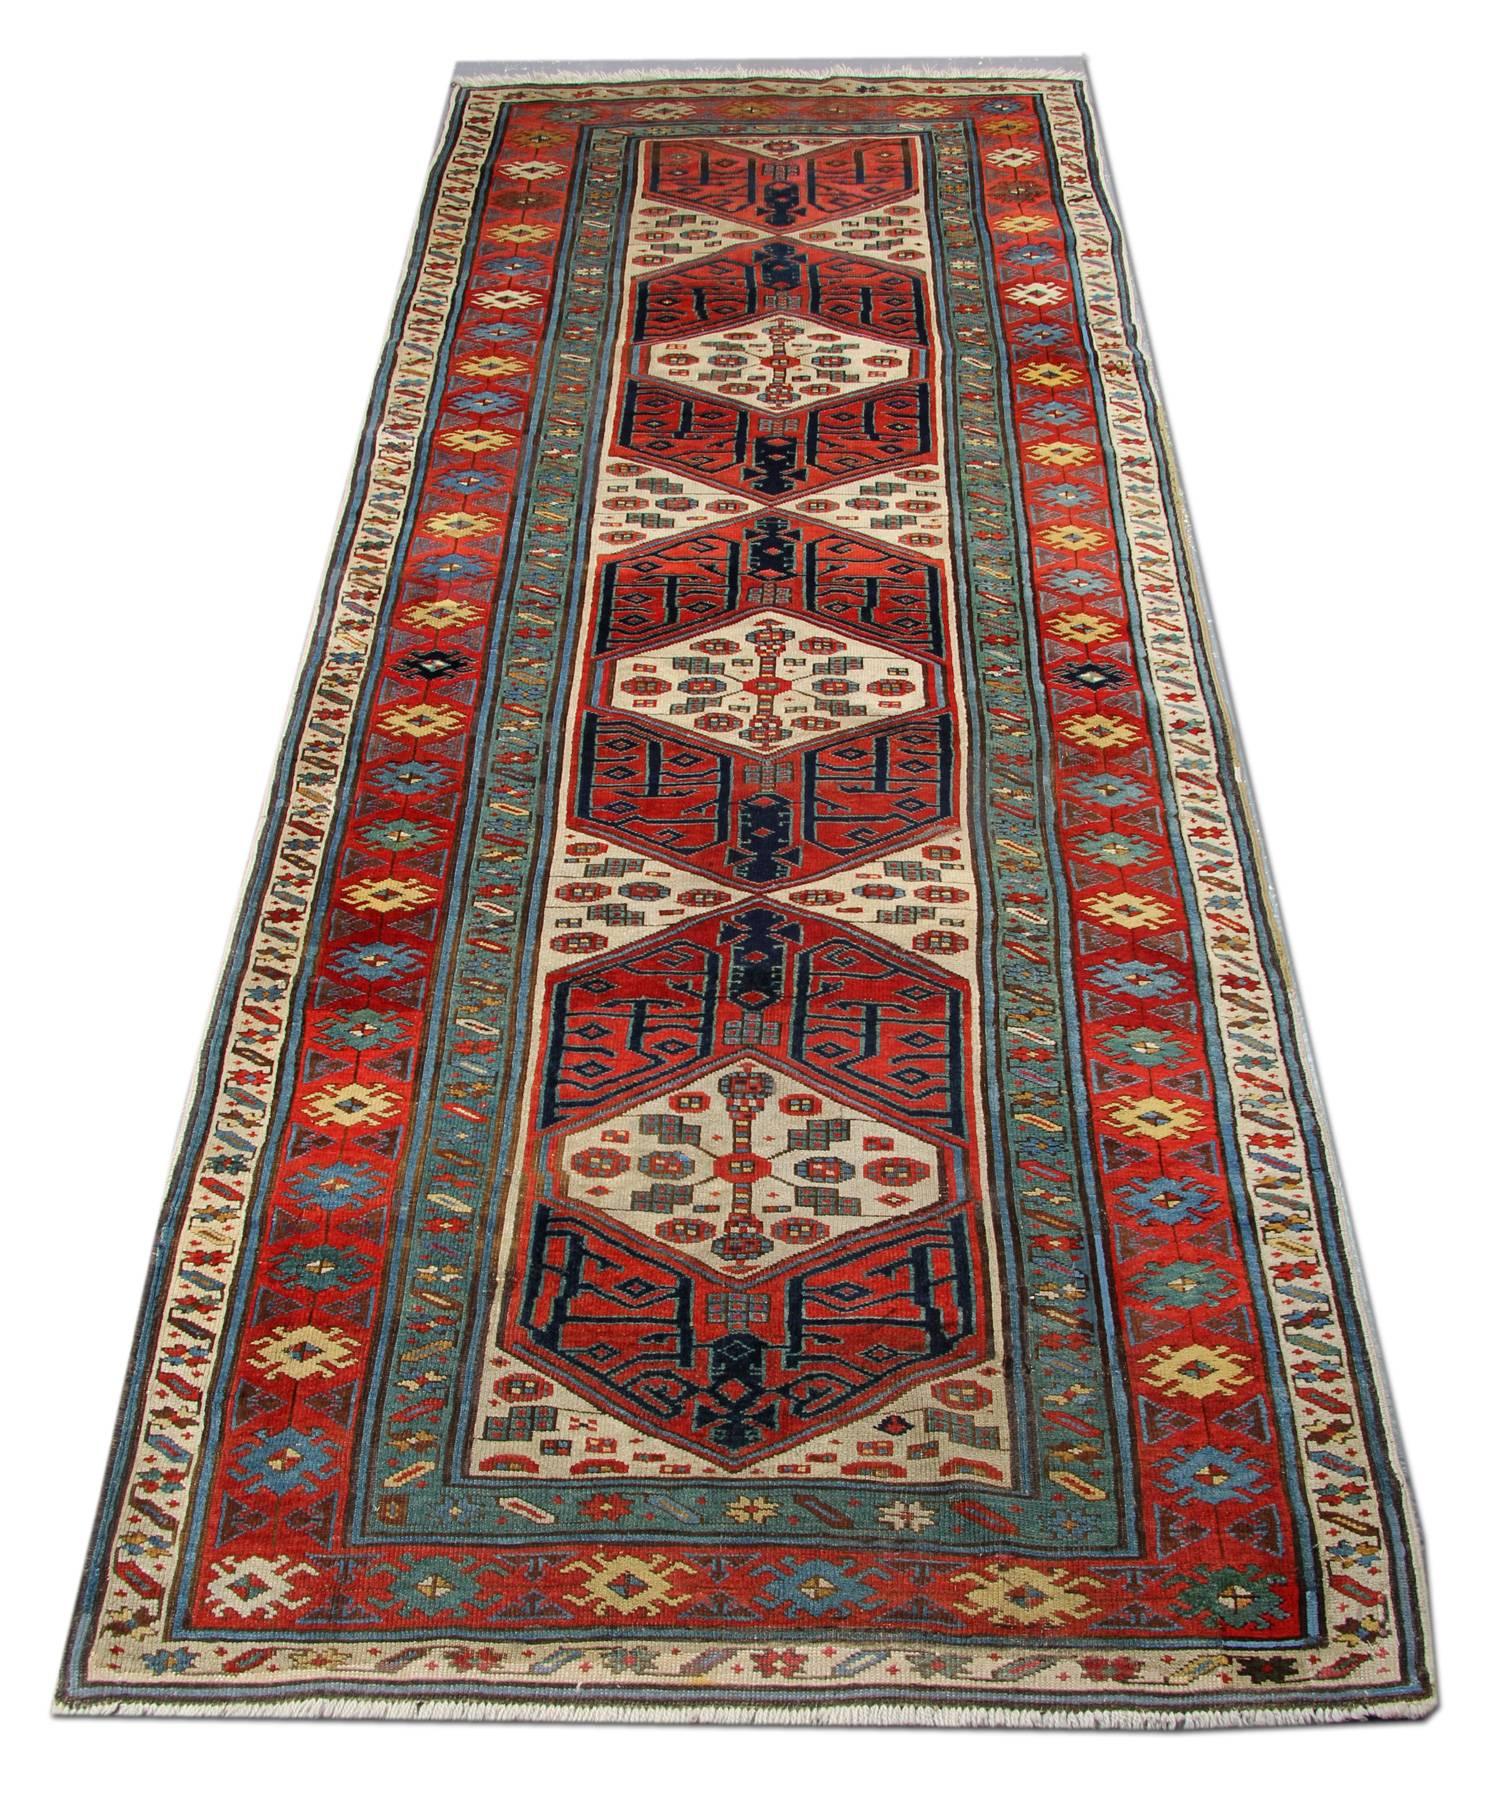 An antique rug rare Caucasian Kazak handmade carpet from the 18th century. This carpet is with an unusual geometric rug pattern on red brick background. This woven rug is surrounded by multiple contrasting floral and geometric designs. Made of the